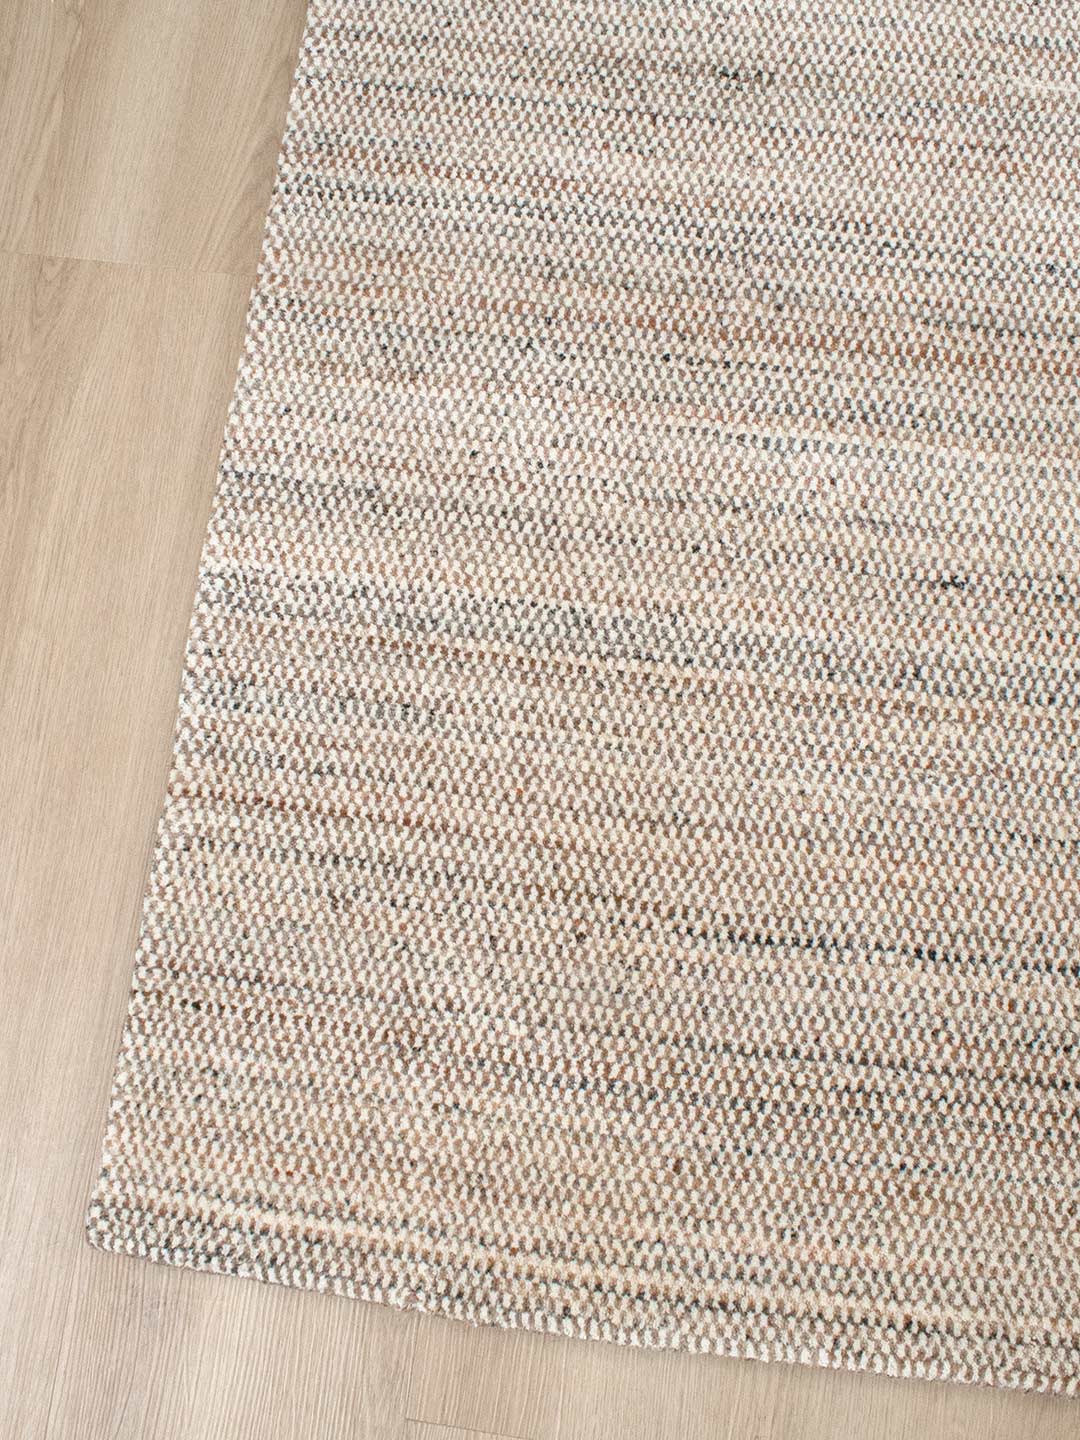 Mystique rug  - The Rug Collection